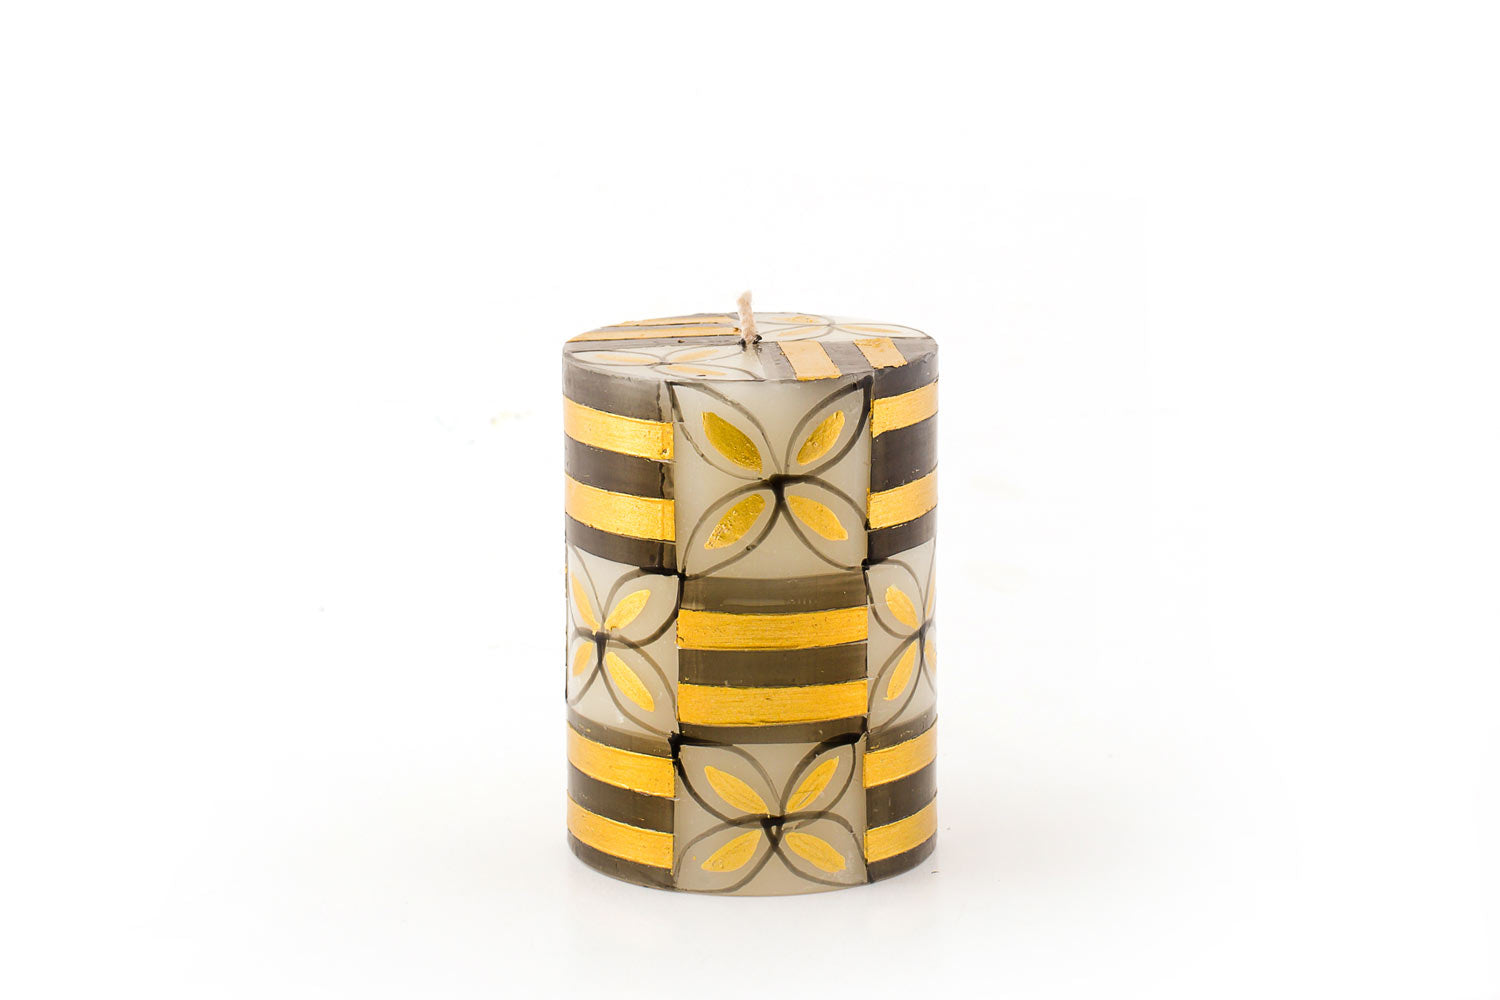 Celebration 3"x4" pillar candle. White background with grey/black & gold hand painted design of stripes and floral.